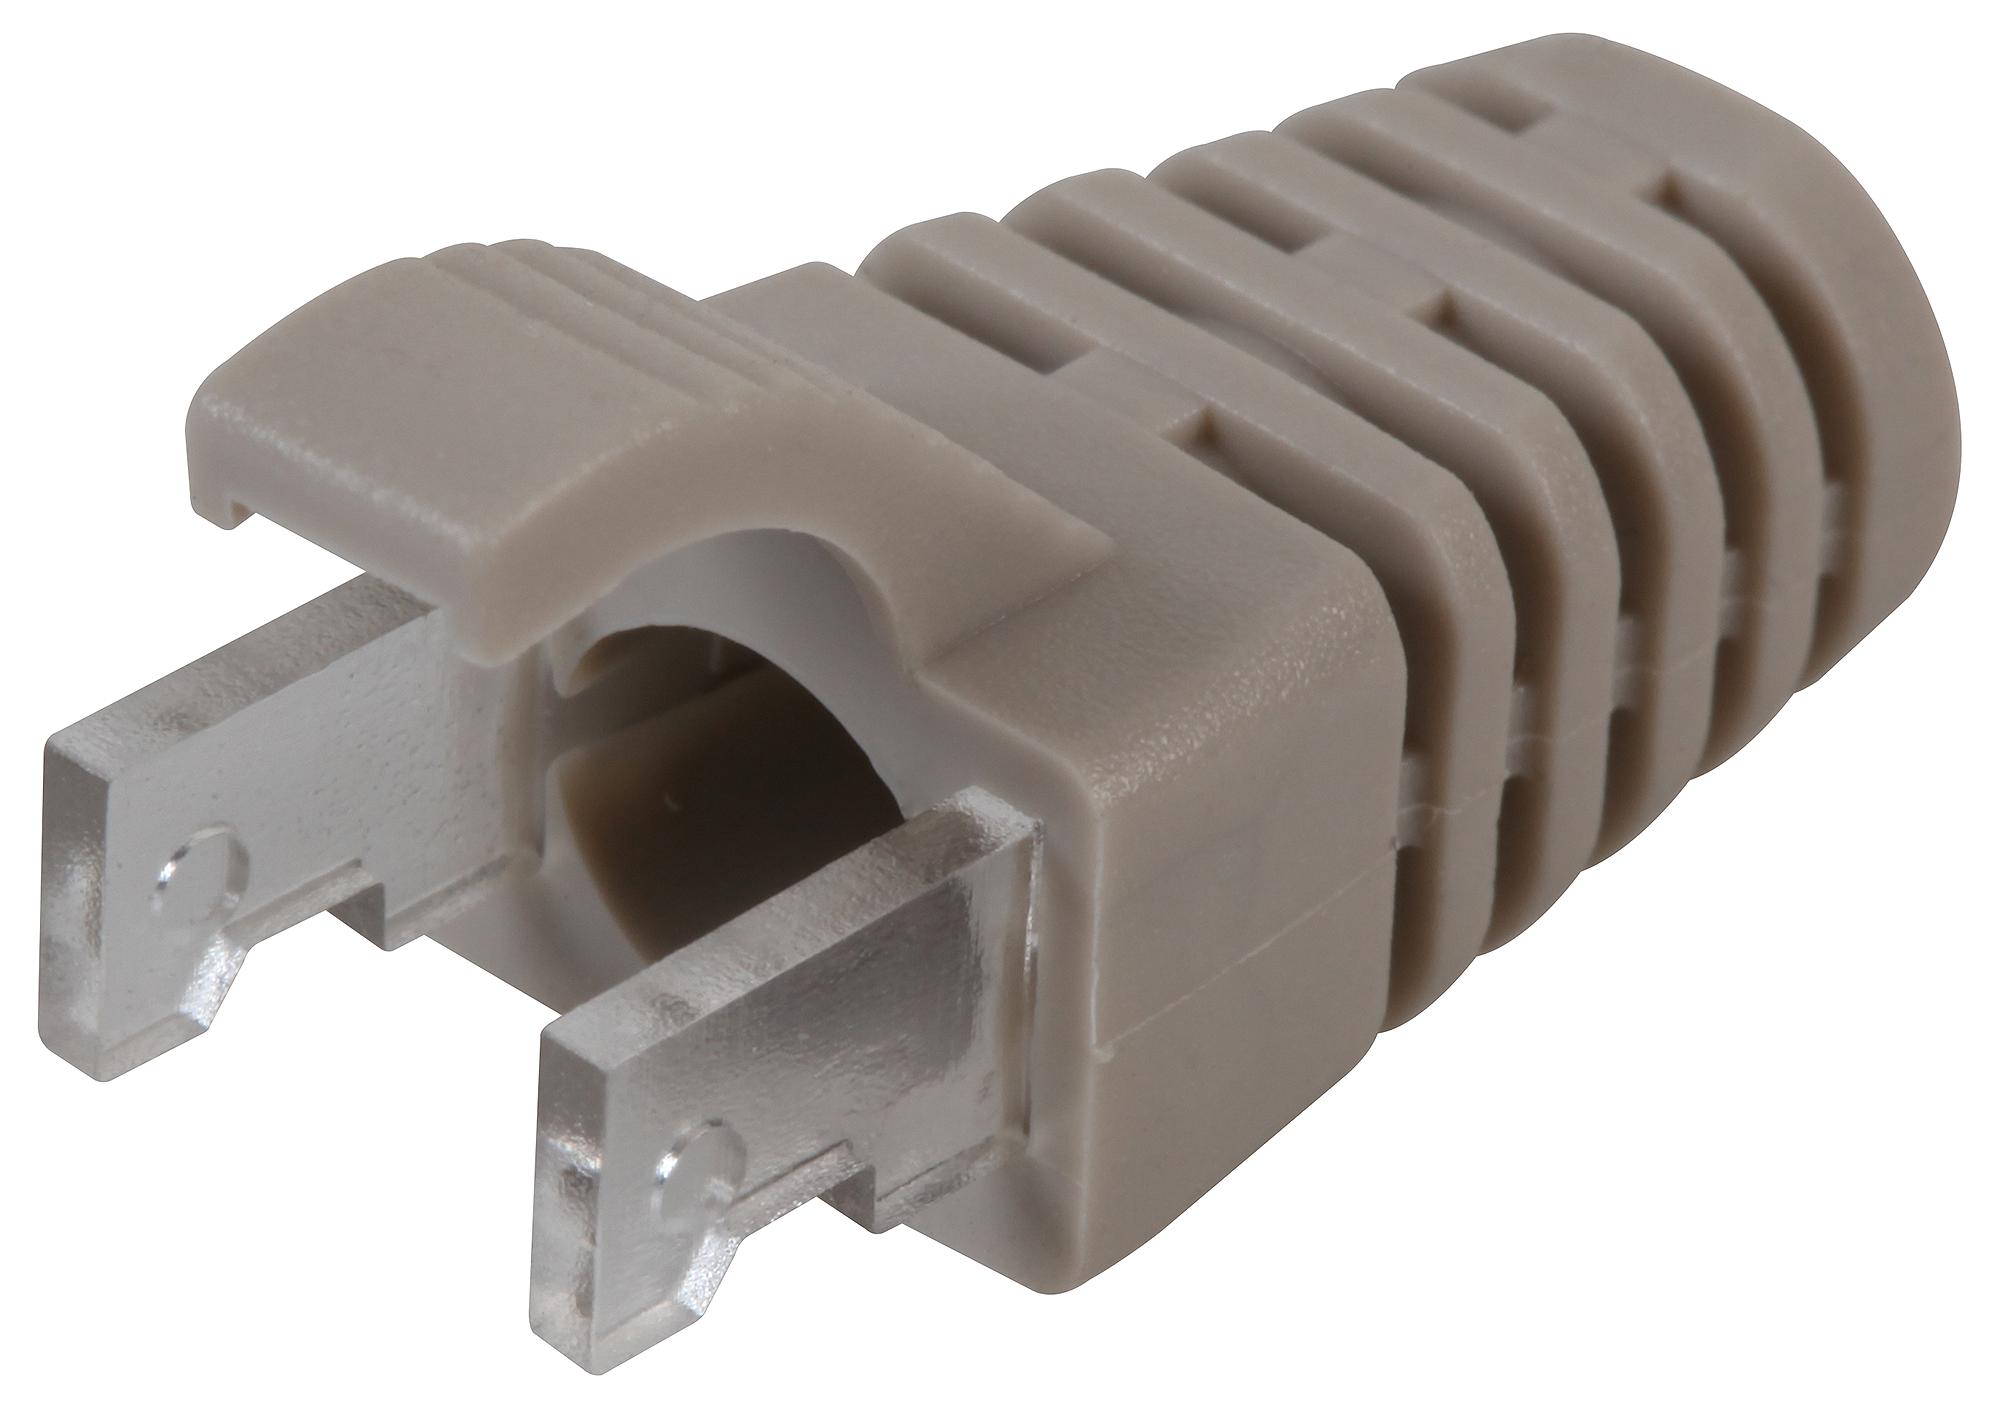 PS6GY#100 STRAIN RELIEF BOOT, PVC, RJ45 CONNECTOR SPEEDY RJ45